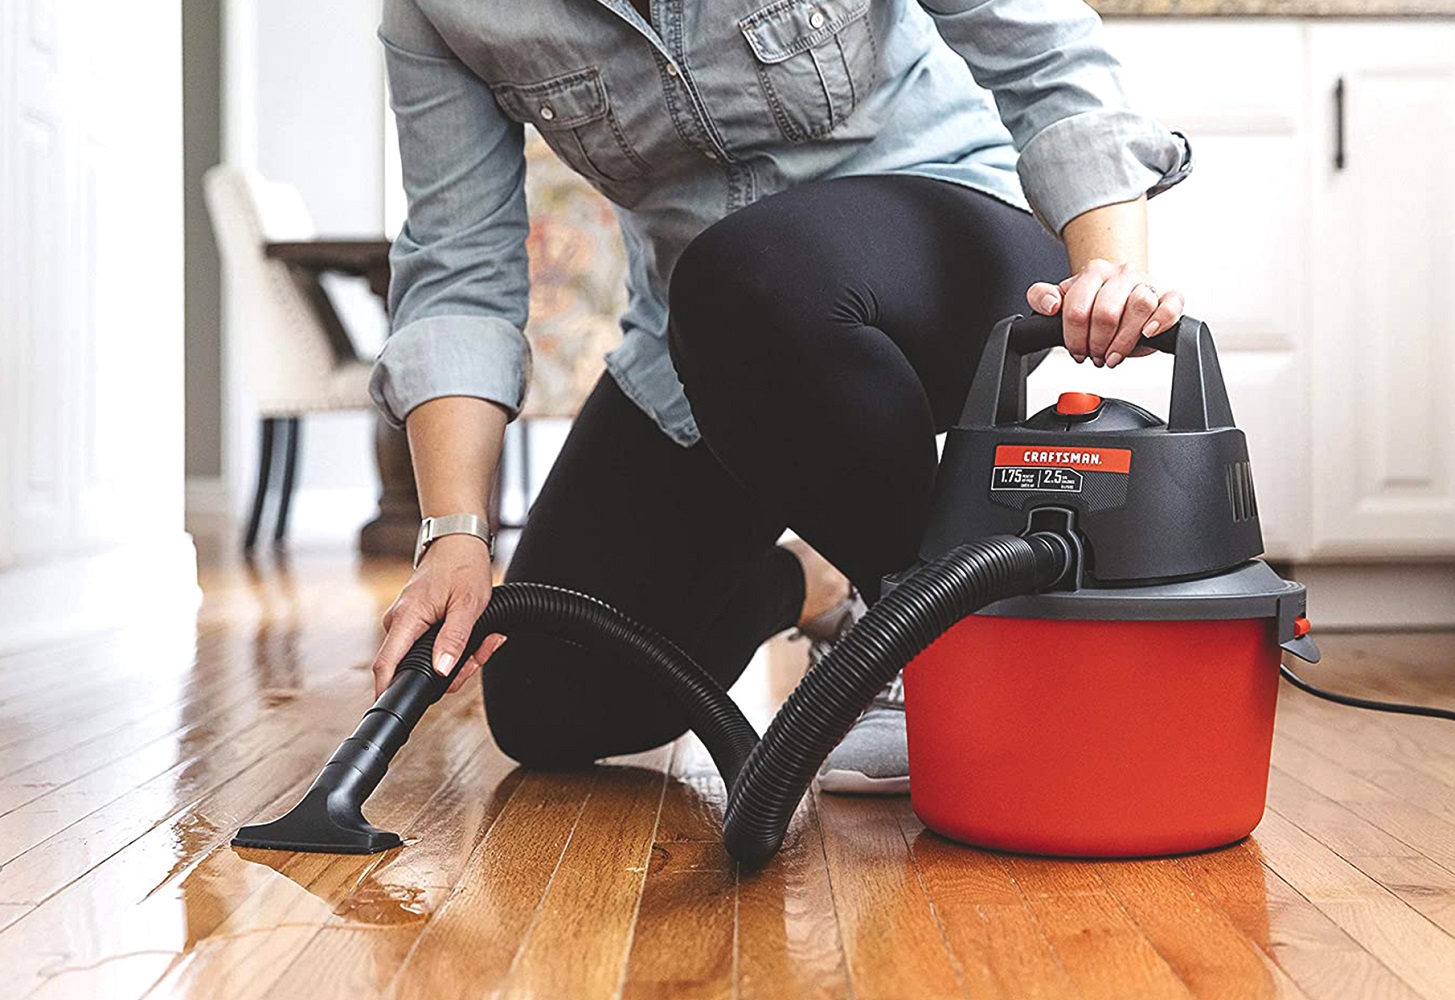 4 Best Wet/Dry Vacuums for November 2022 | Check Reviews